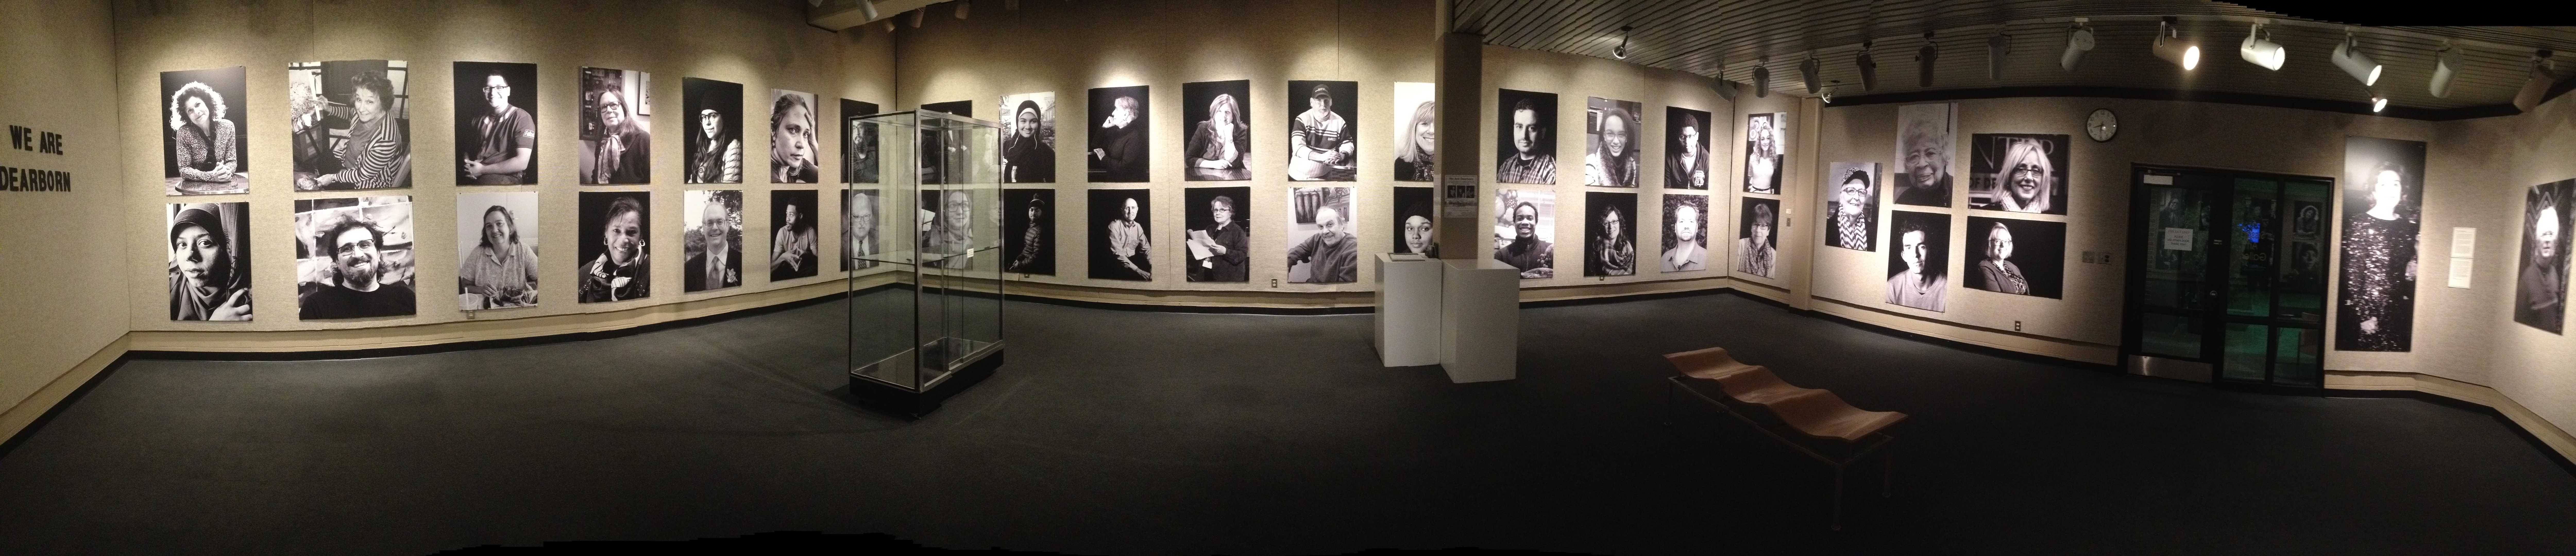 Panoramic shot of "We Are Dearborn" exhibit